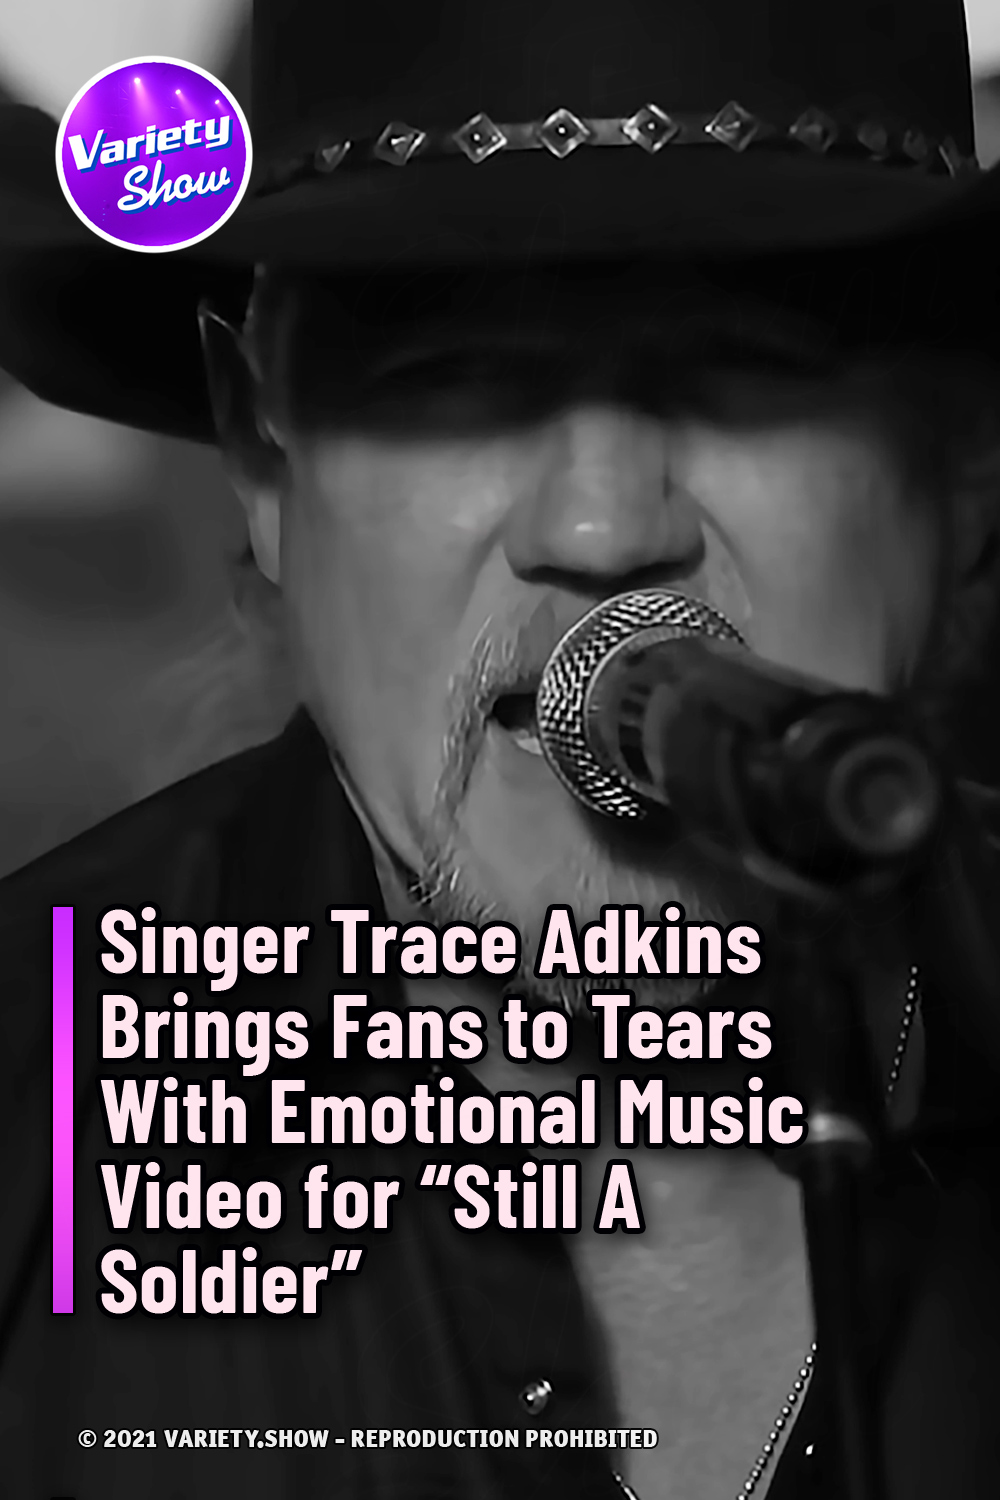 Singer Trace Adkins Brings Fans to Tears With Emotional Music Video for “Still A Soldier”